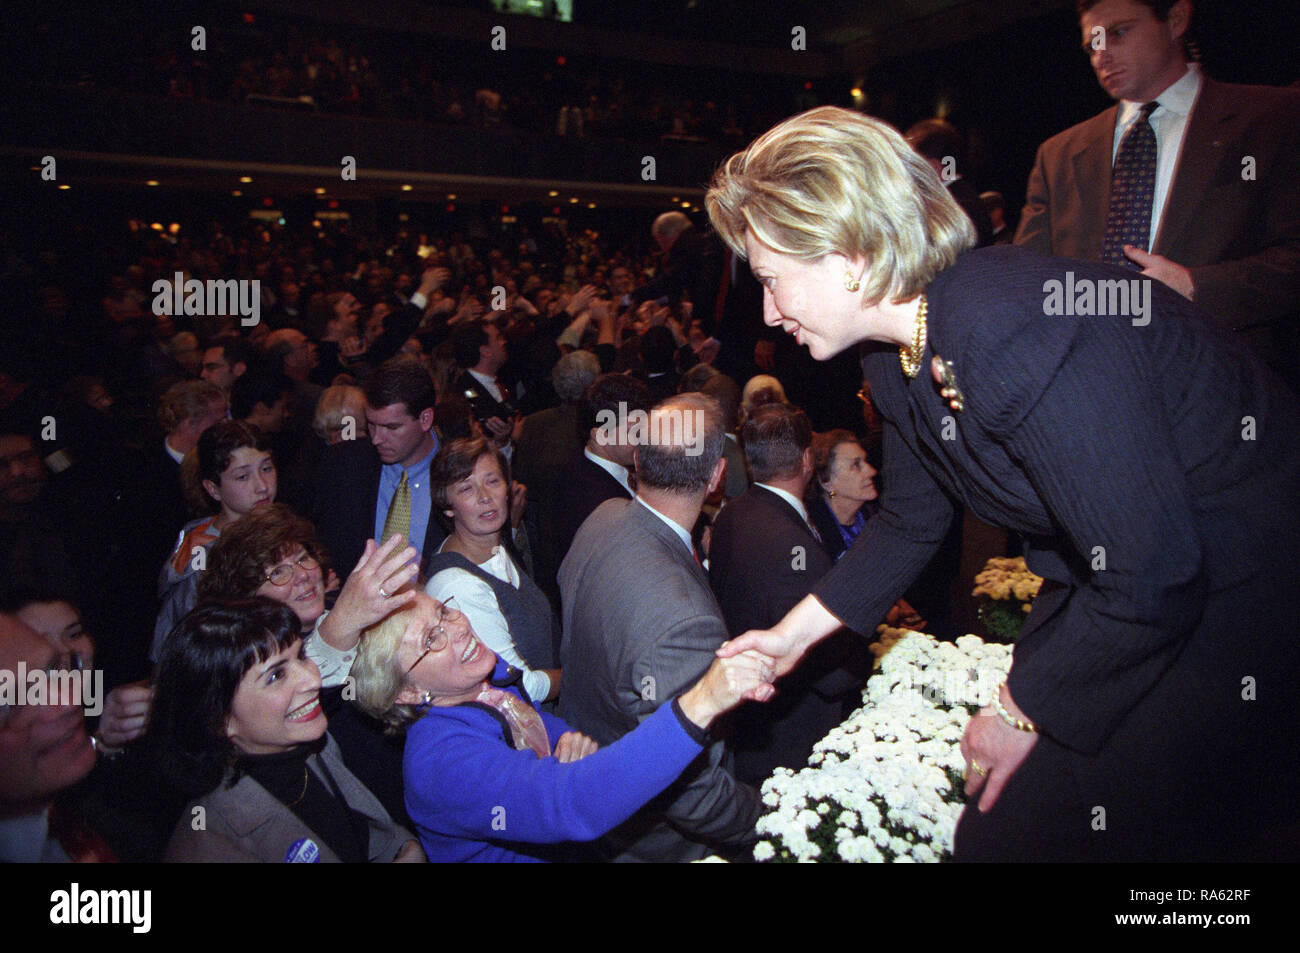 Photograph of First Lady Hillary Rodham Clinton Shaking Hands with a Lady in the Crowd at a 'Hillary Rodham Clinton for Senate' Event in Hempstead, New York 10/22/2000 Stock Photo